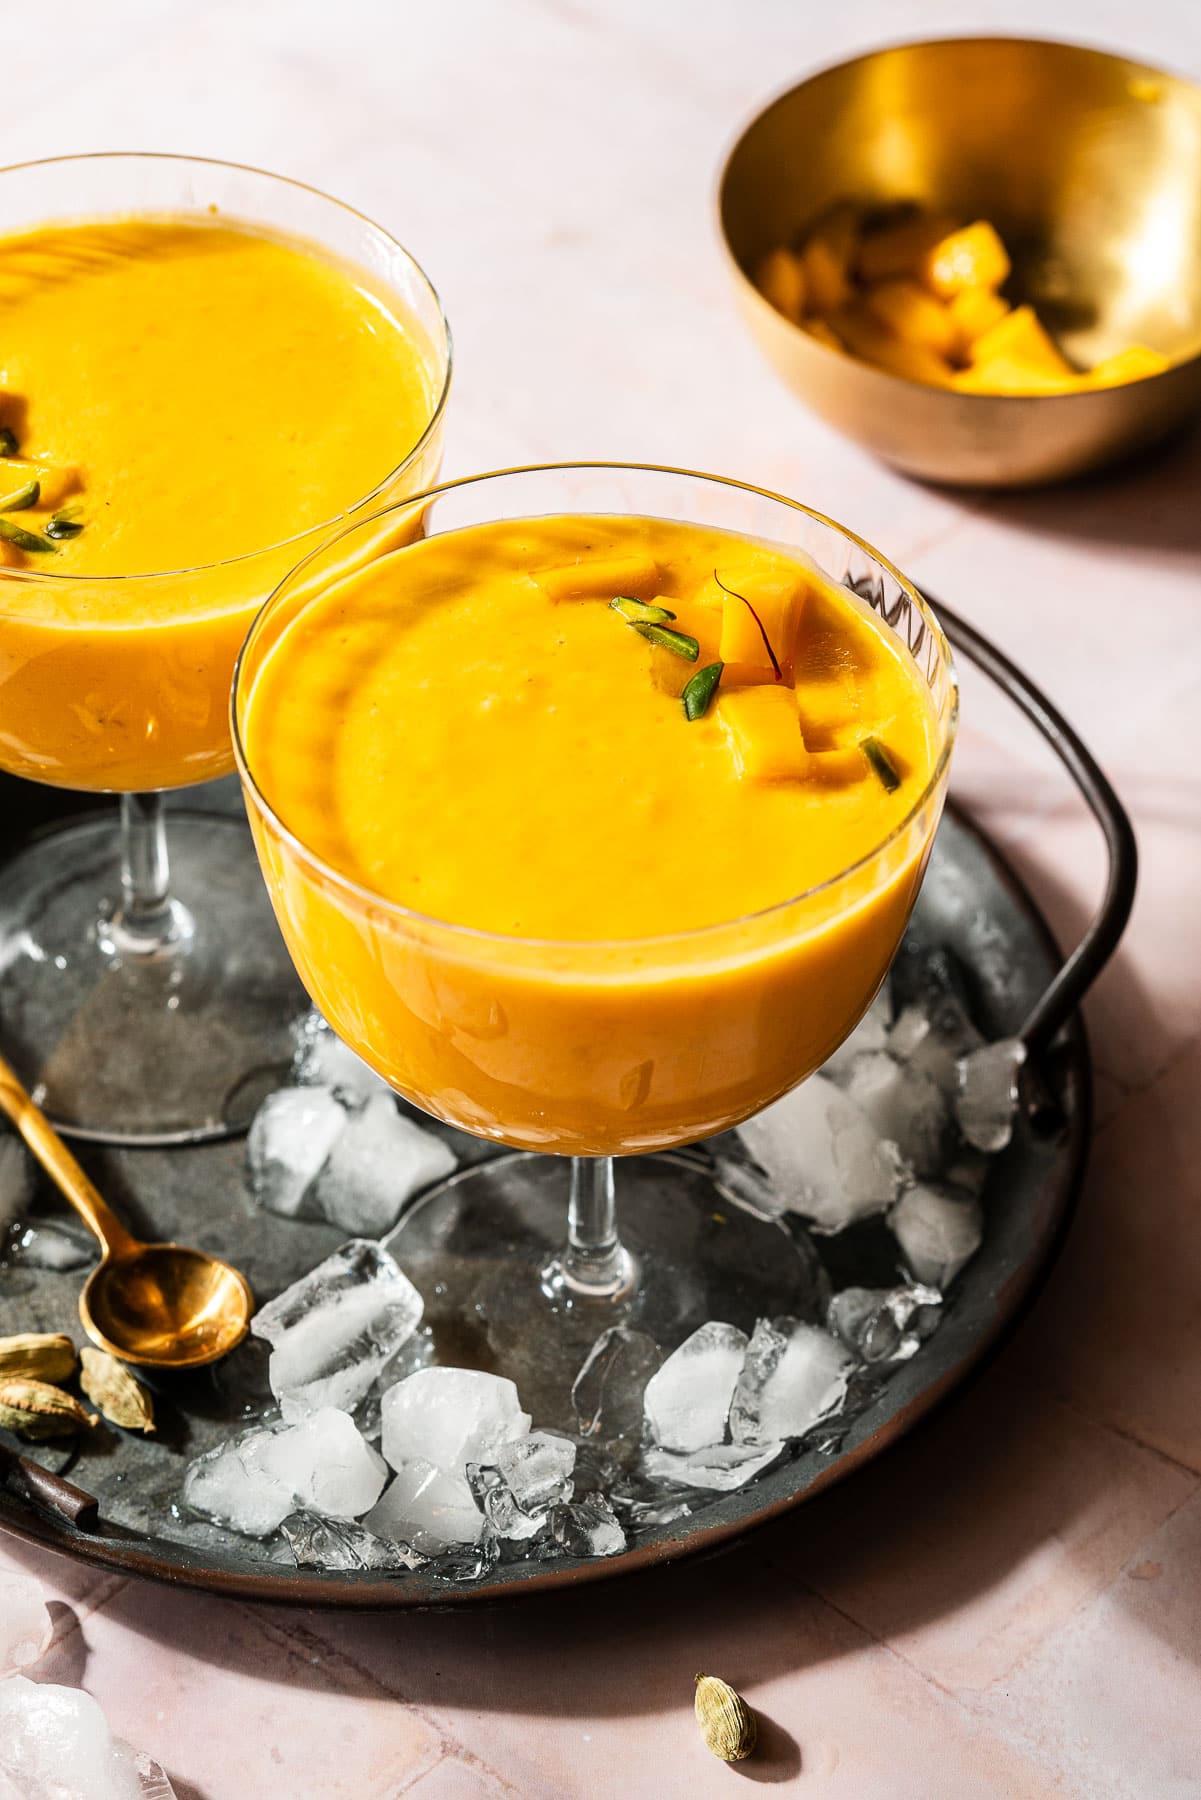 Two glasses of mango lassis in a platter with green cardamom pods.